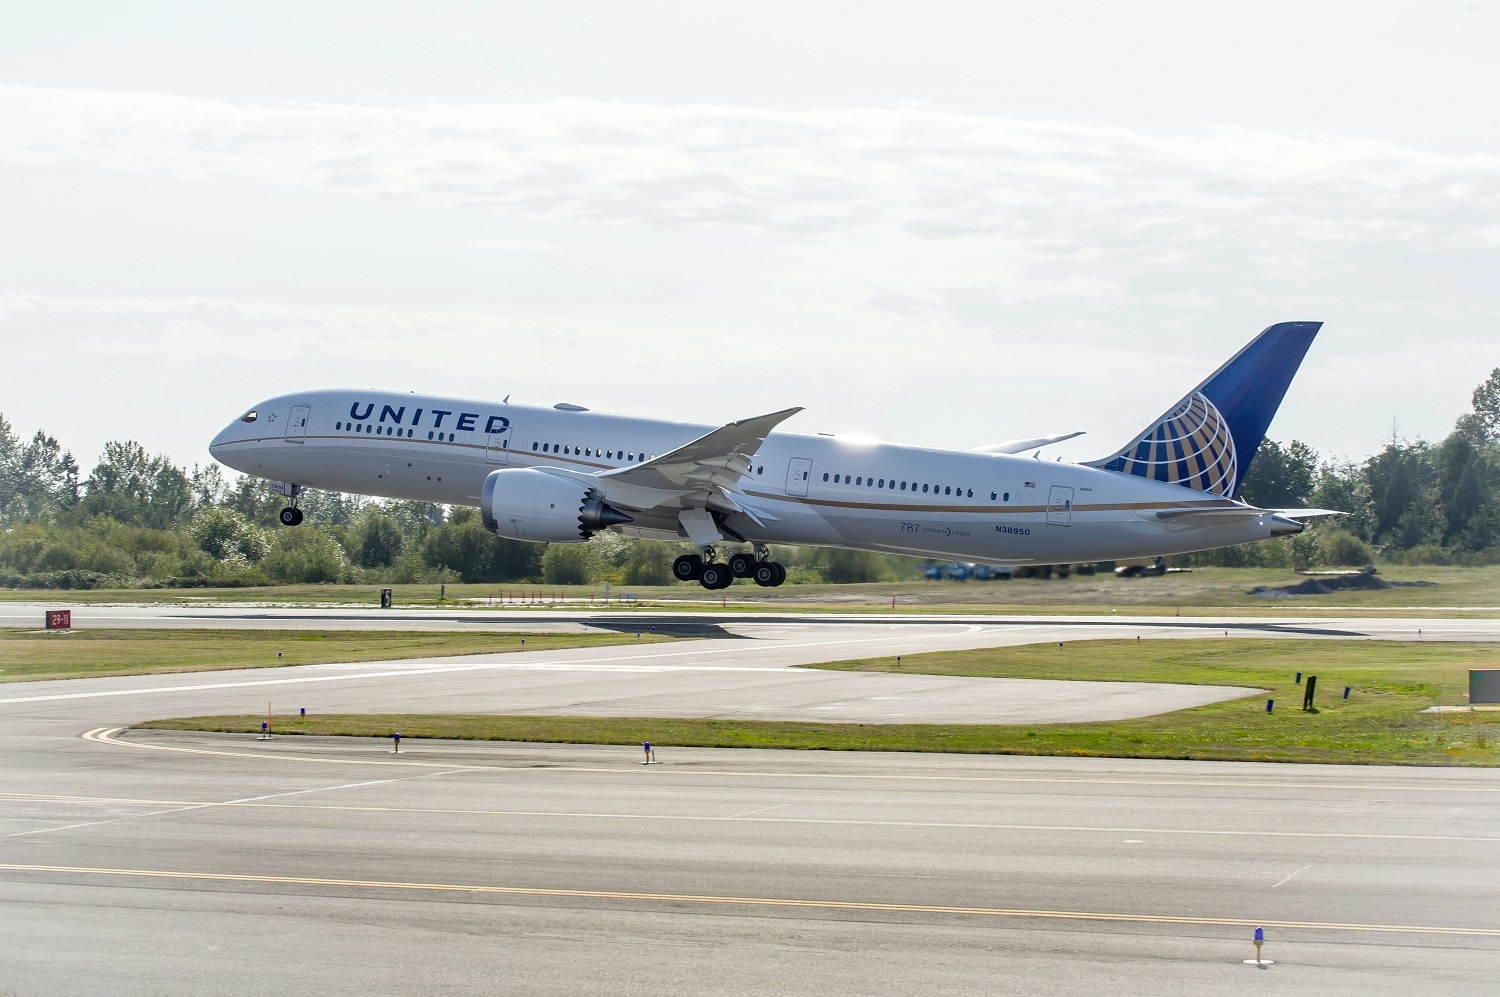 United Airlines positioned to become the largest Boeing 787 operator